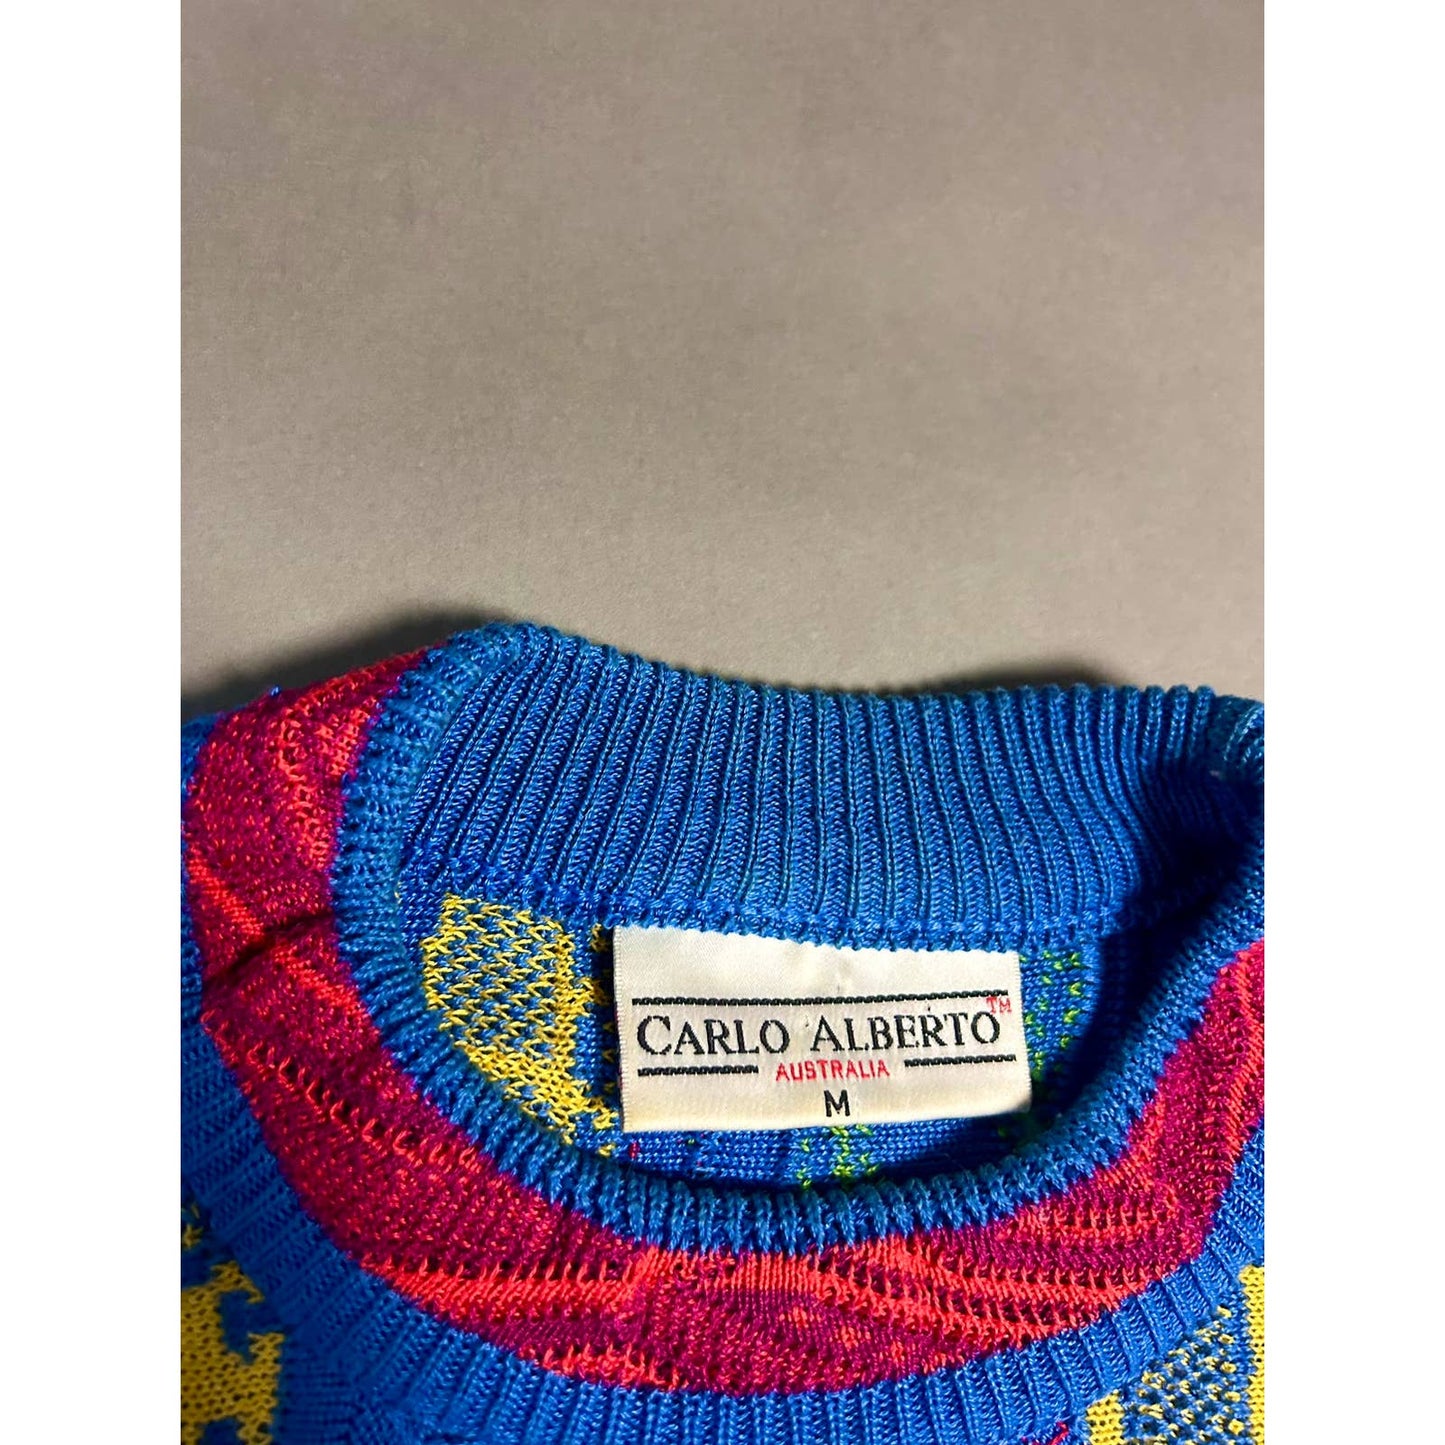 Carlo alberto vintage cable knit sweater Coogi style